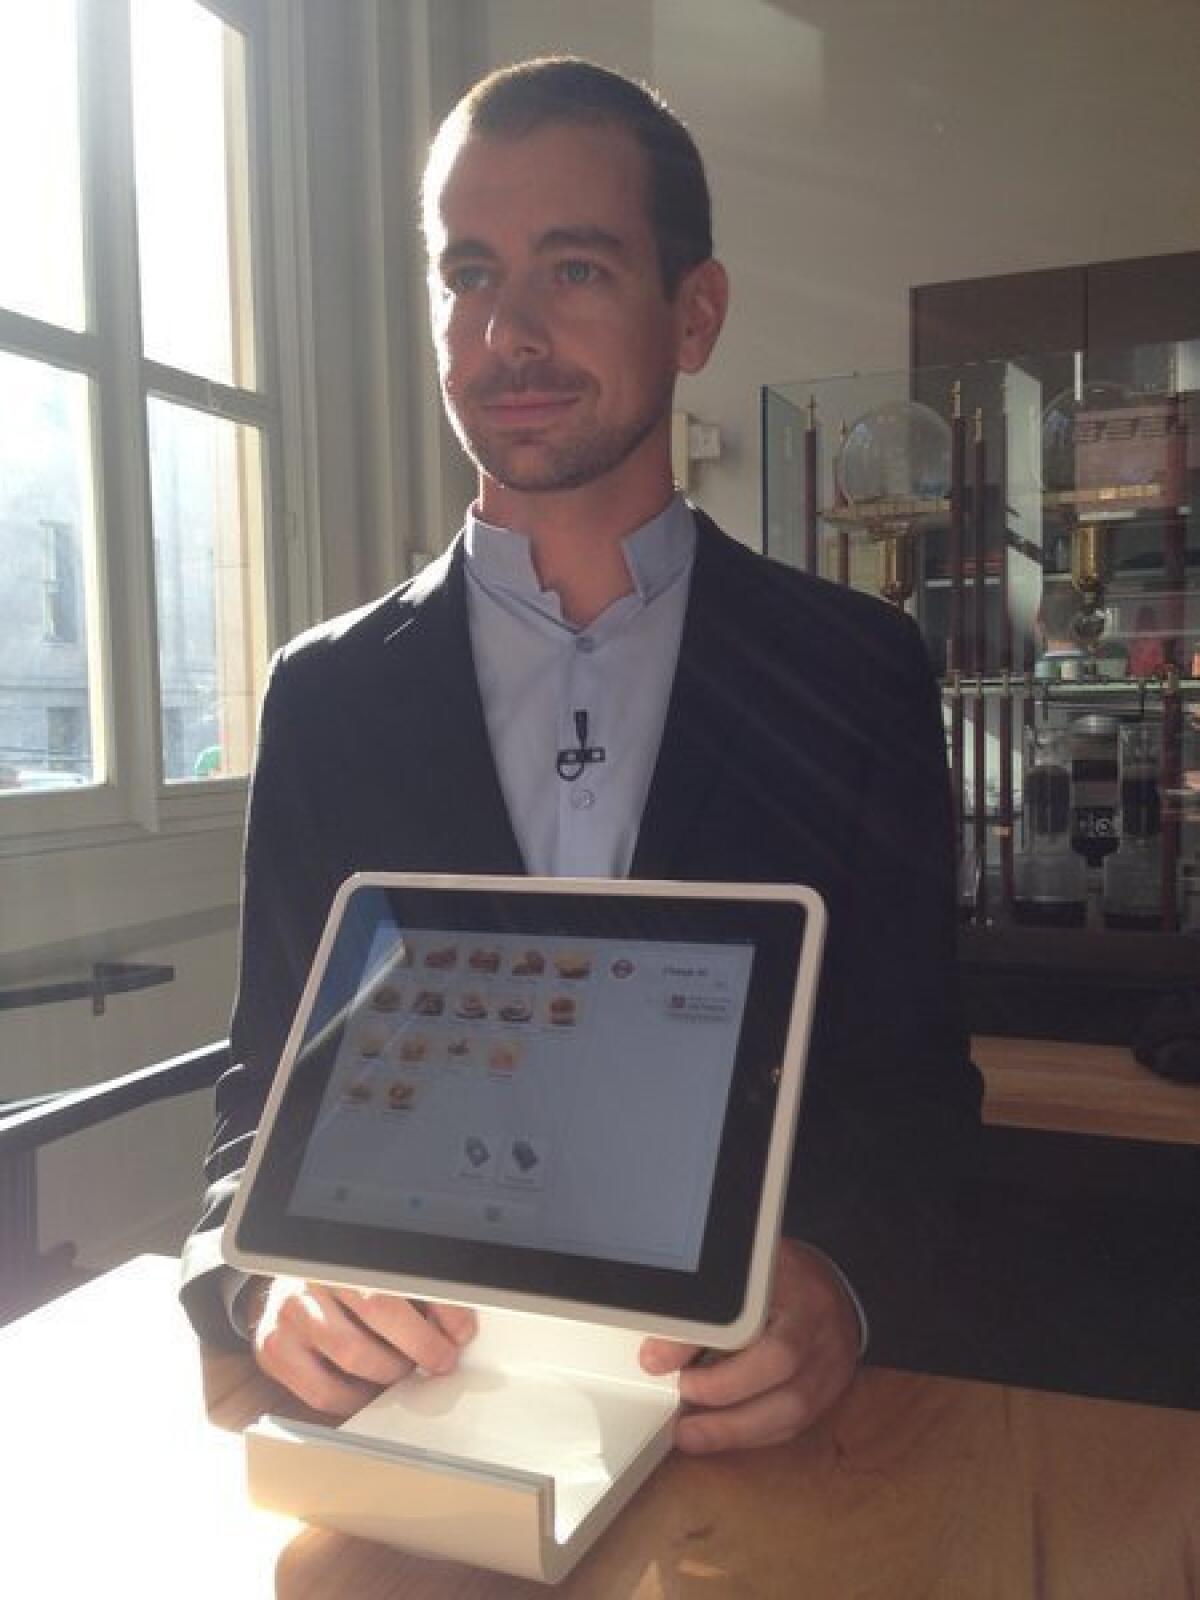 Jack Dorsey, CEO and co-founder of San Francisco payments company Square, unveiled the new Square Stand at a press conference in San Francisco.